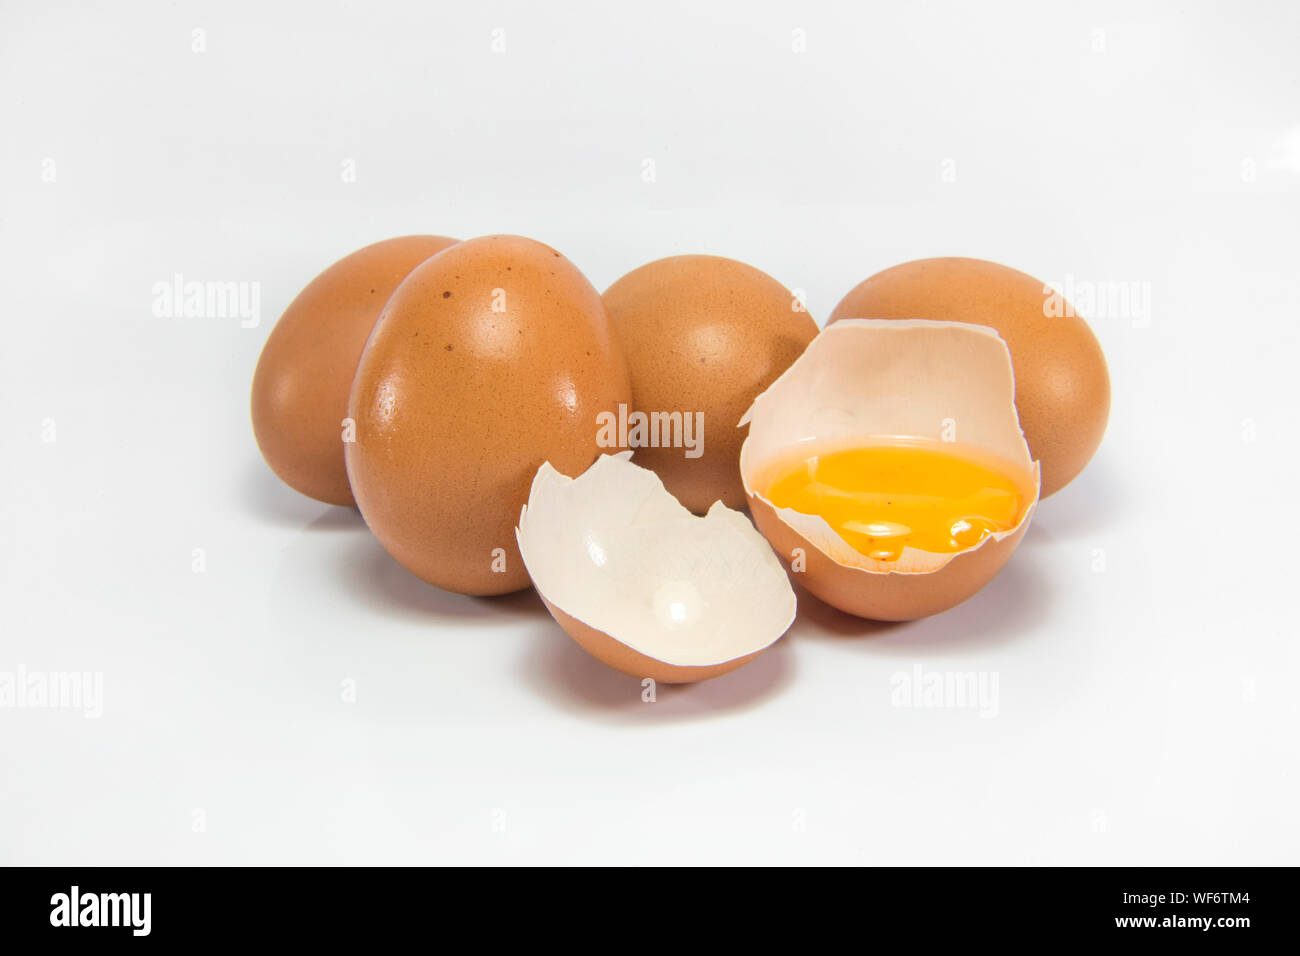 Close-up Of Brown Eggs With Broken Eggshell Against White Background Stock Photo